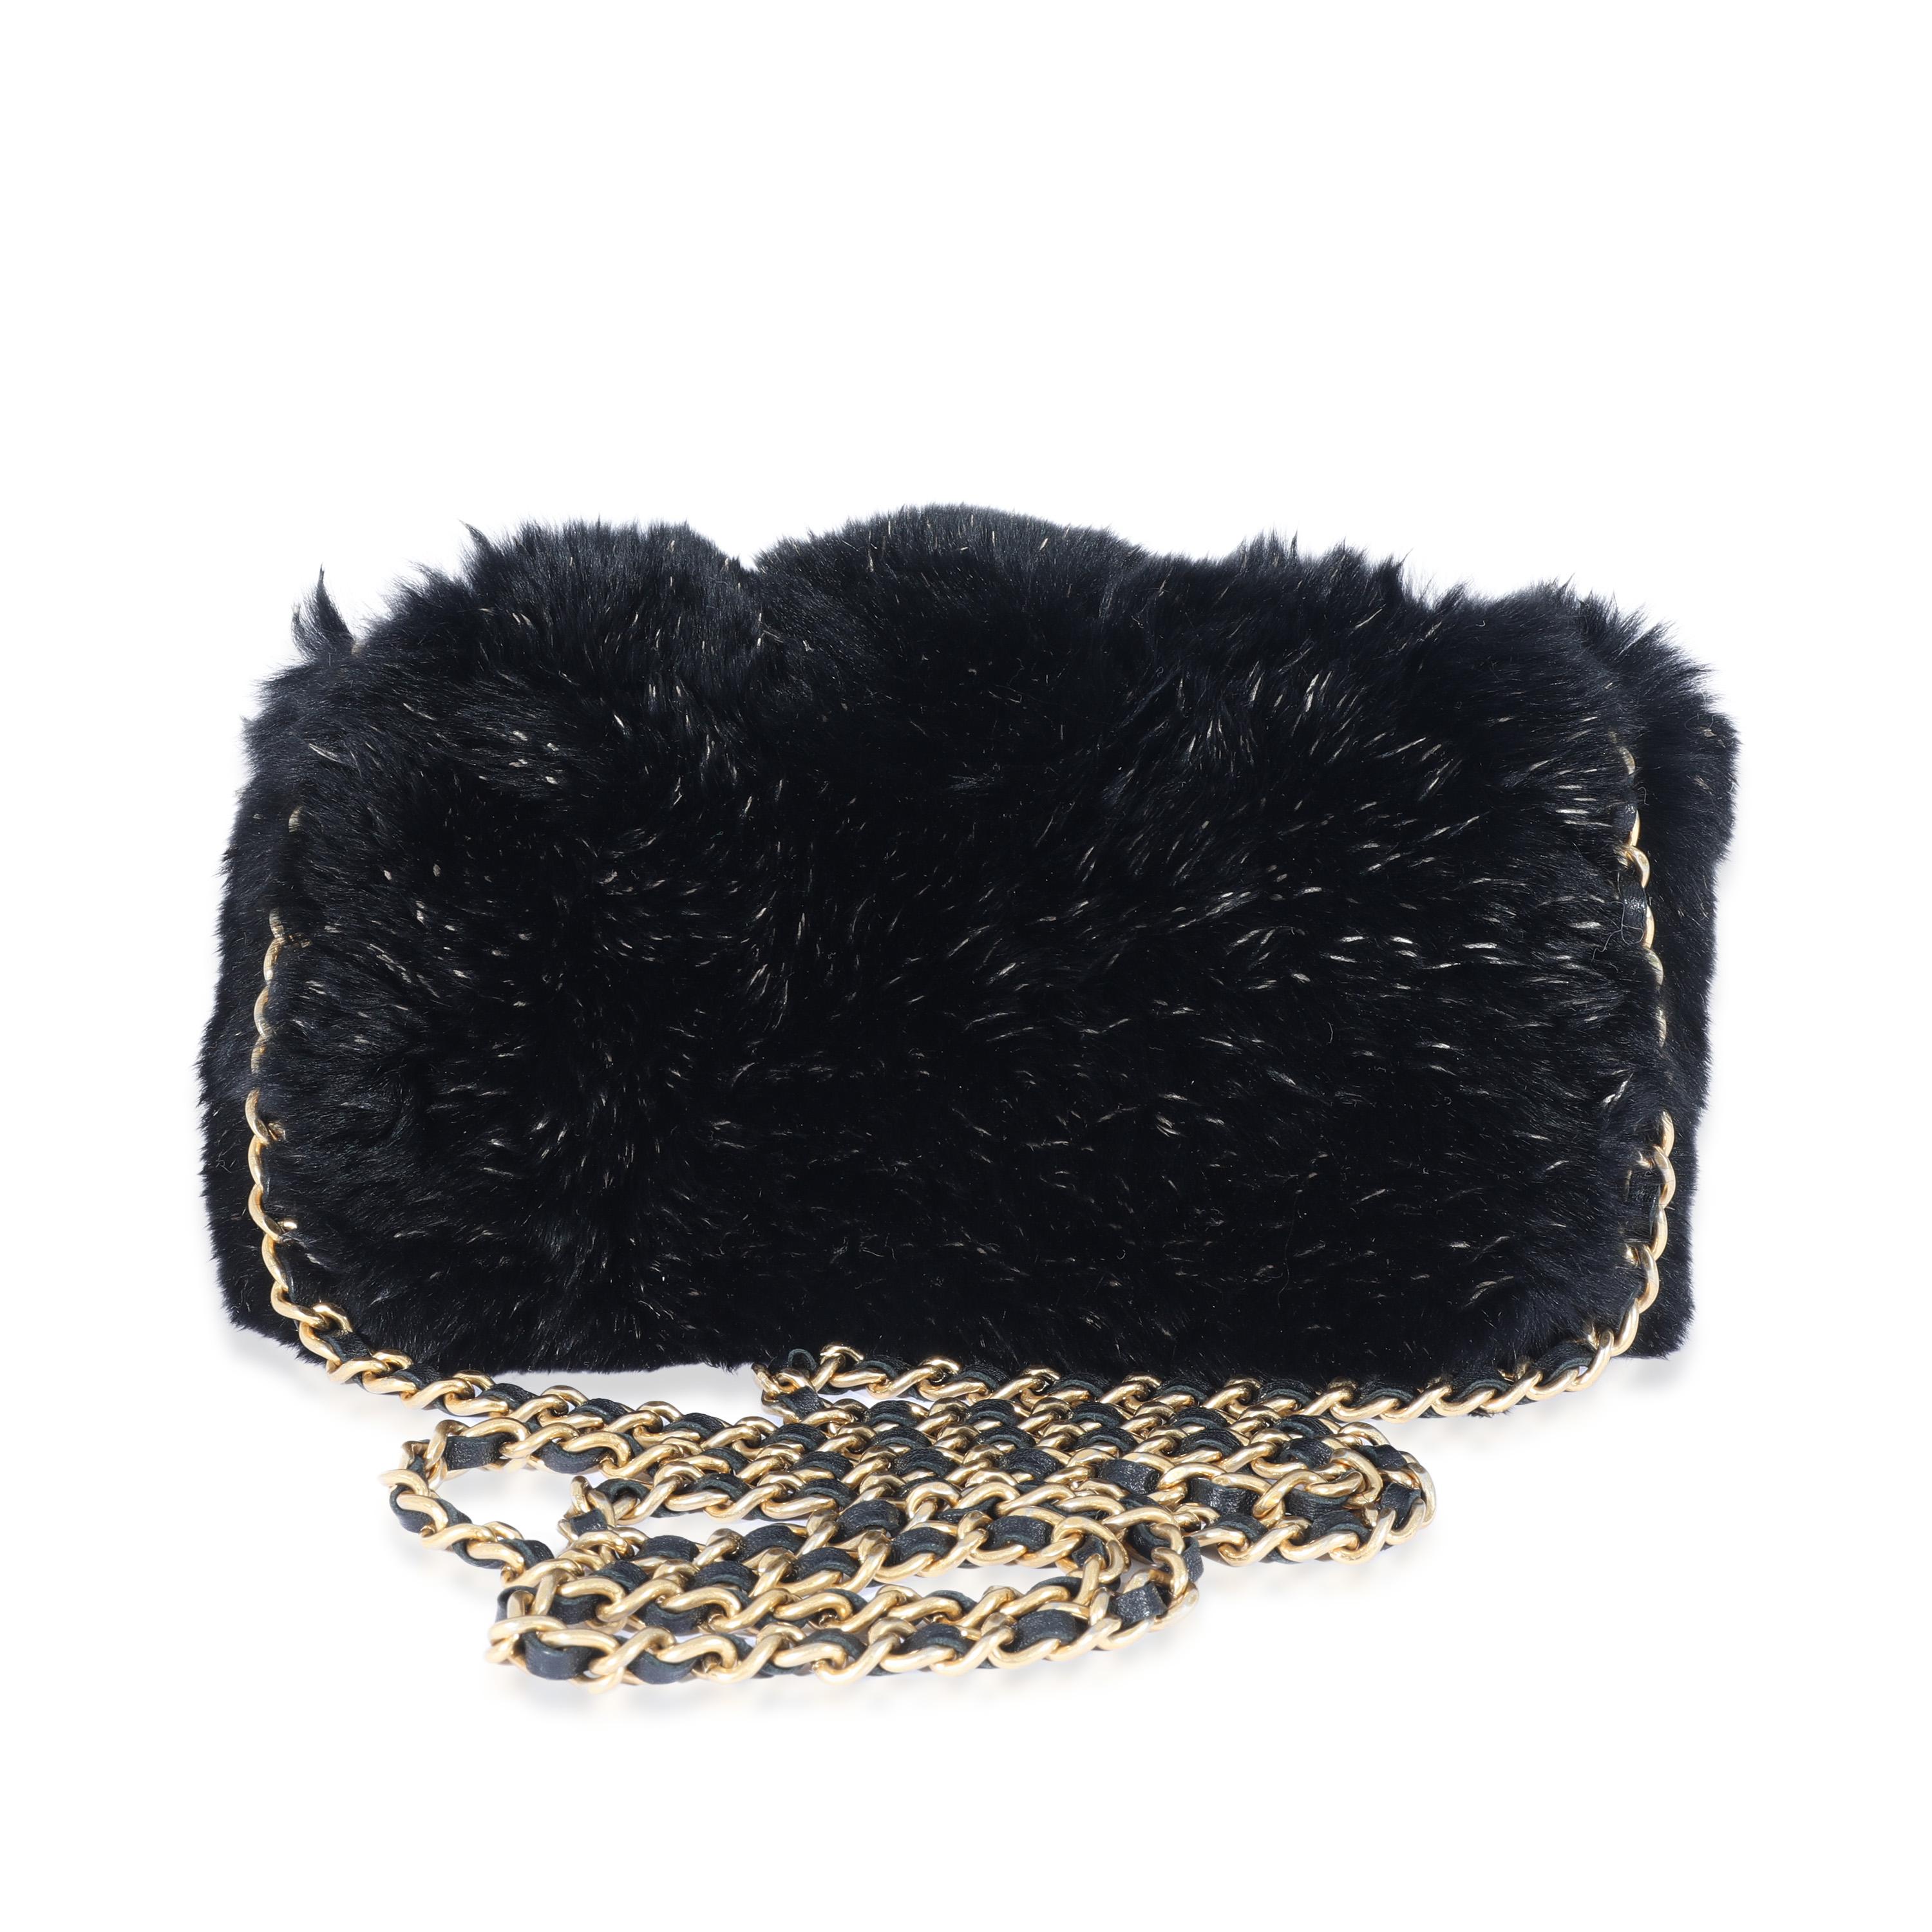 Chanel CC Black Fur Chain Clutch In Excellent Condition For Sale In New York, NY